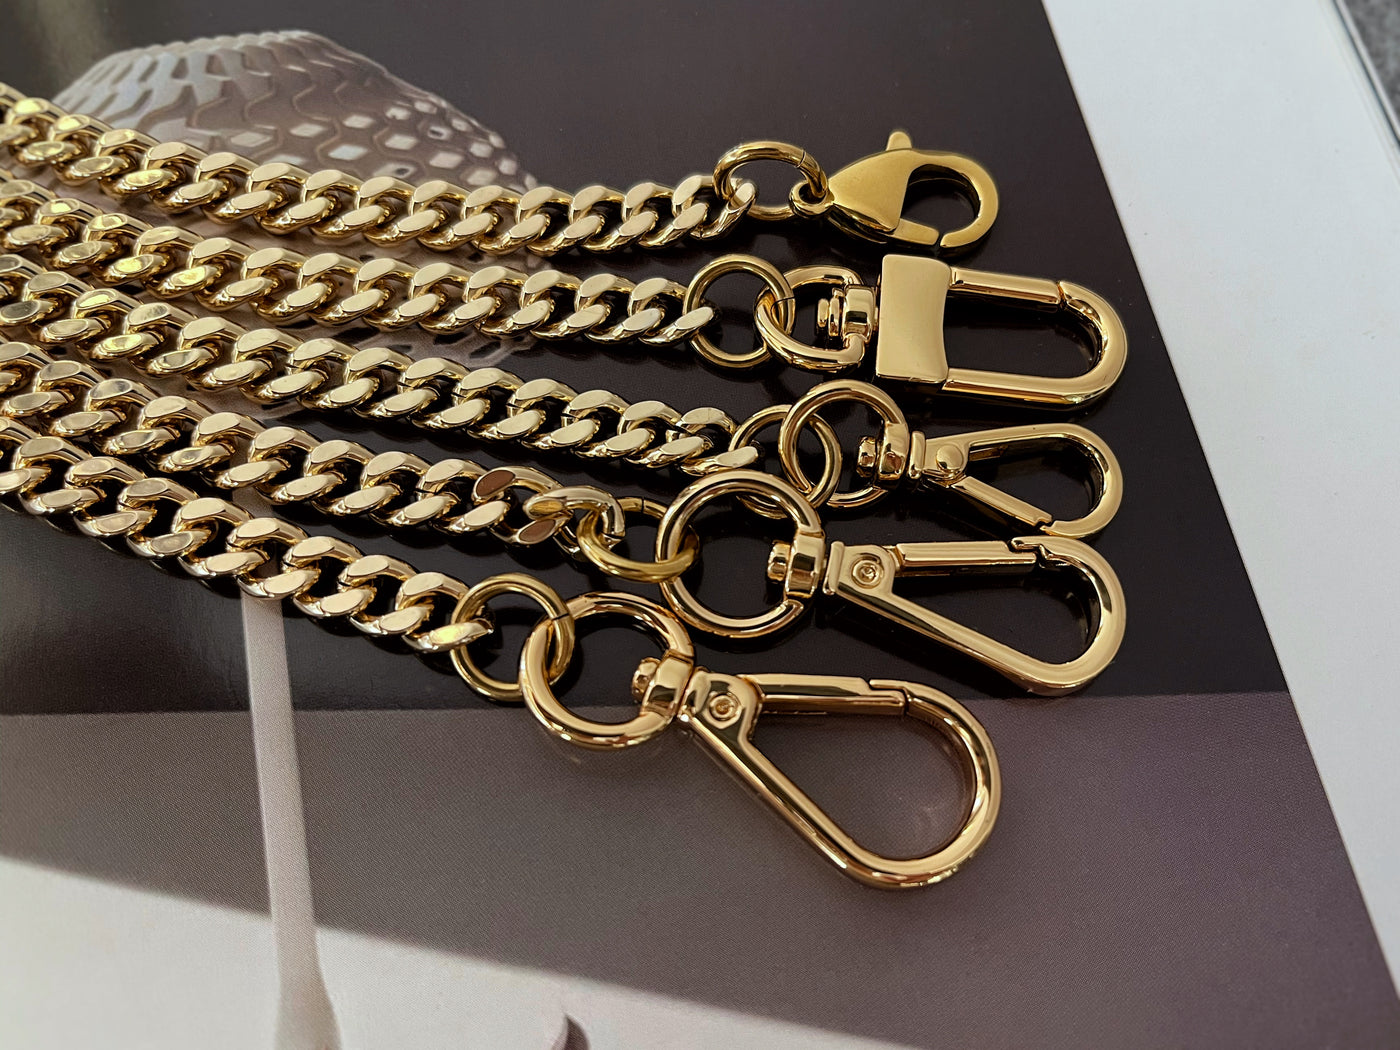 Upgrade Your Bag with a Chic Chain Strap - Simple DIY Guide